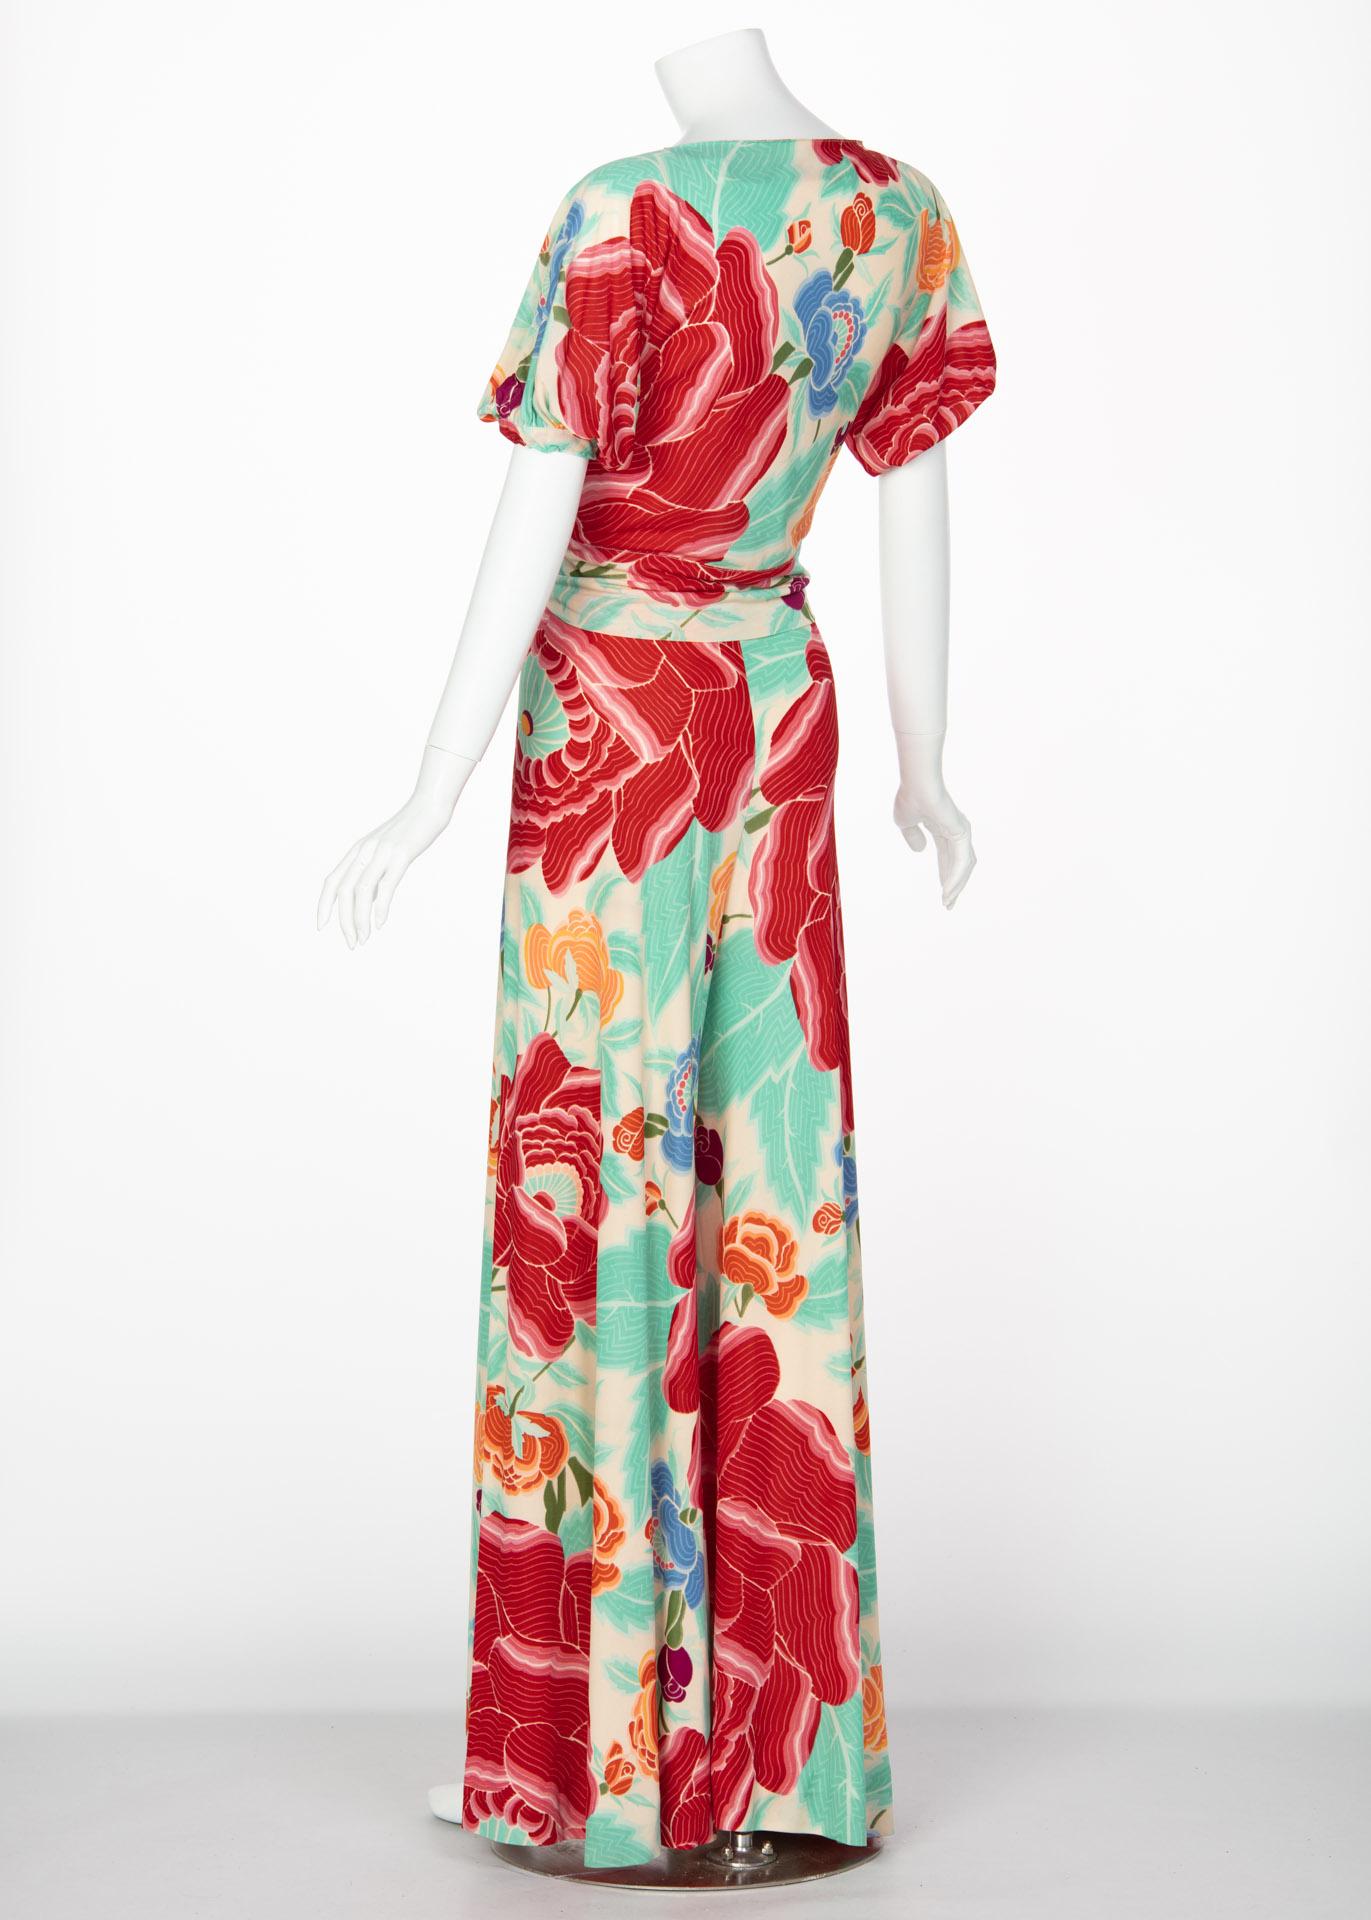 Missoni Multicolored Floral Print Top Palazzo Pant Set, 1970s  For Sale 1